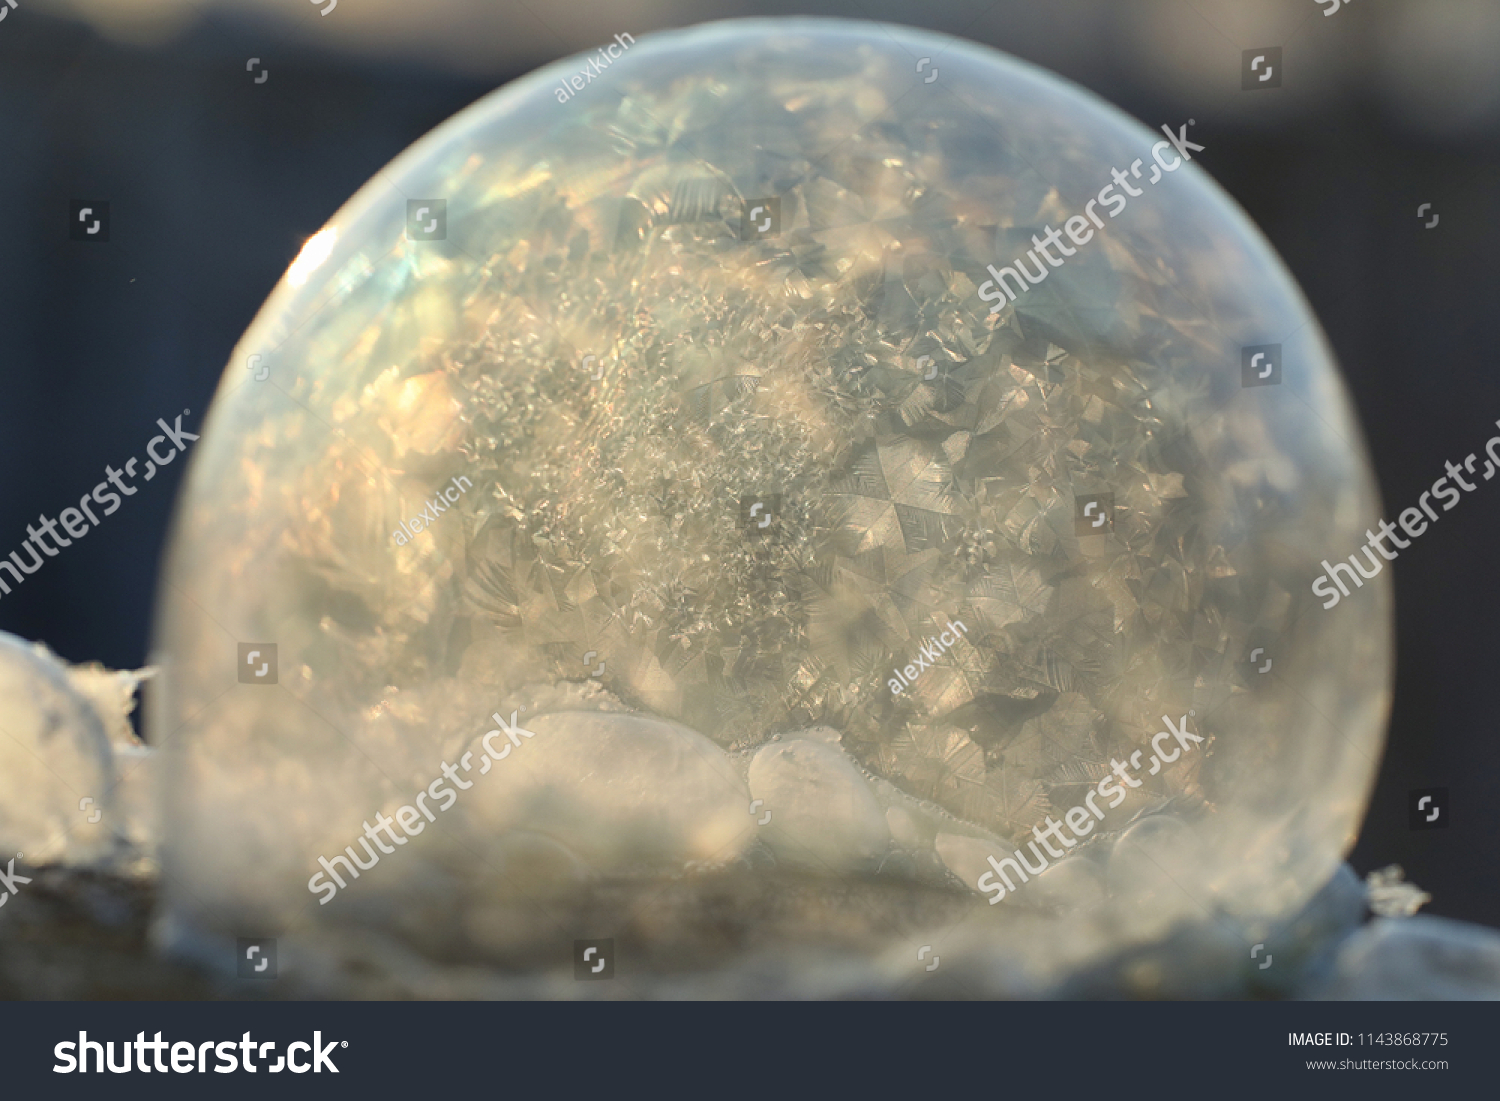 Soap bubbles freeze in the cold. Winter soapy water freezes in air.
 #1143868775